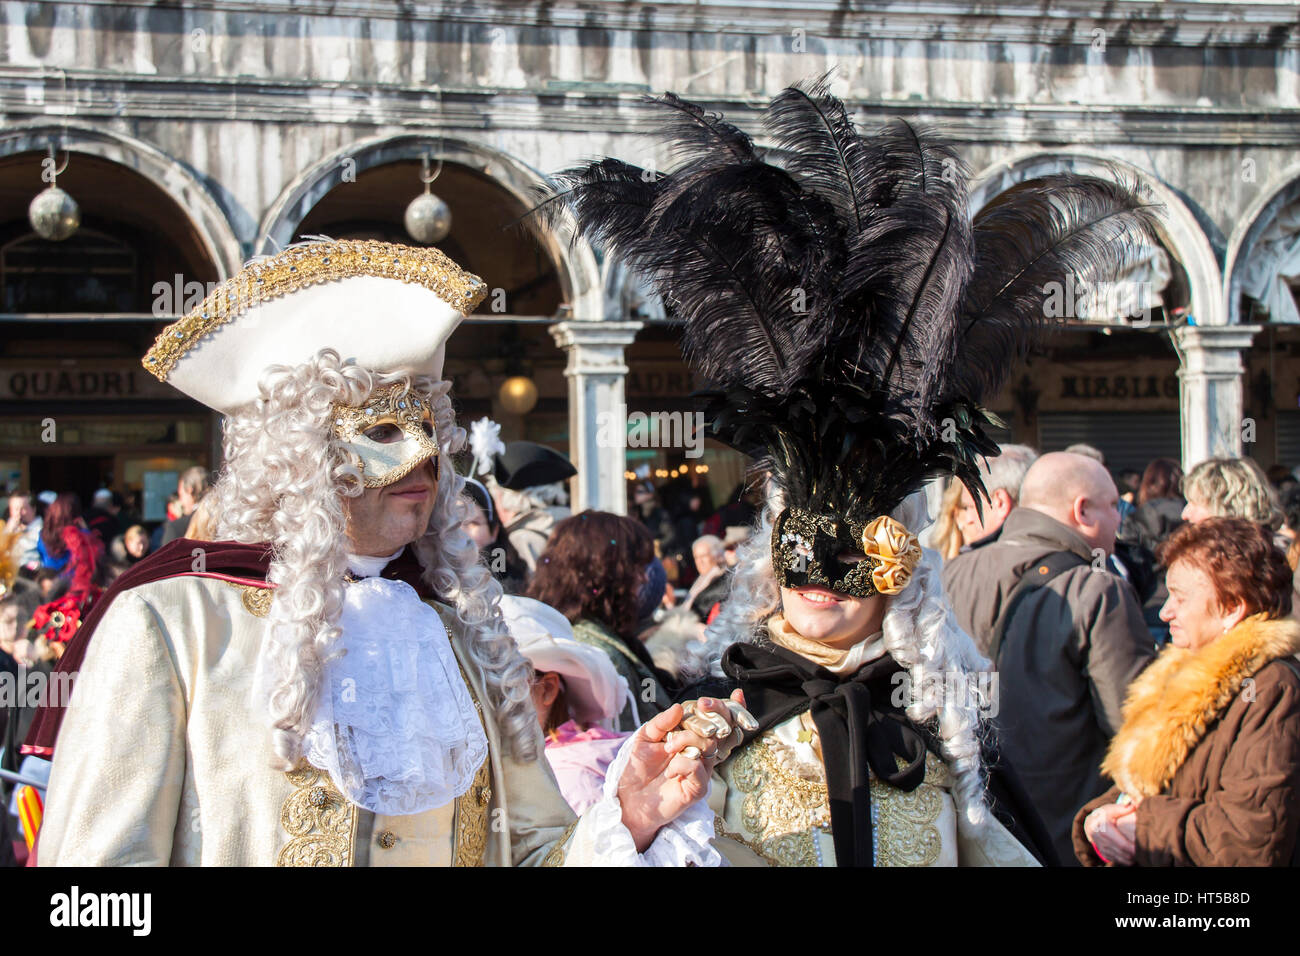 ITALY, VENICE - FEBRUARY 14: Colorful carnival masks at the most famous European Carnival on February 14, 2010 in Venice. Stock Photo